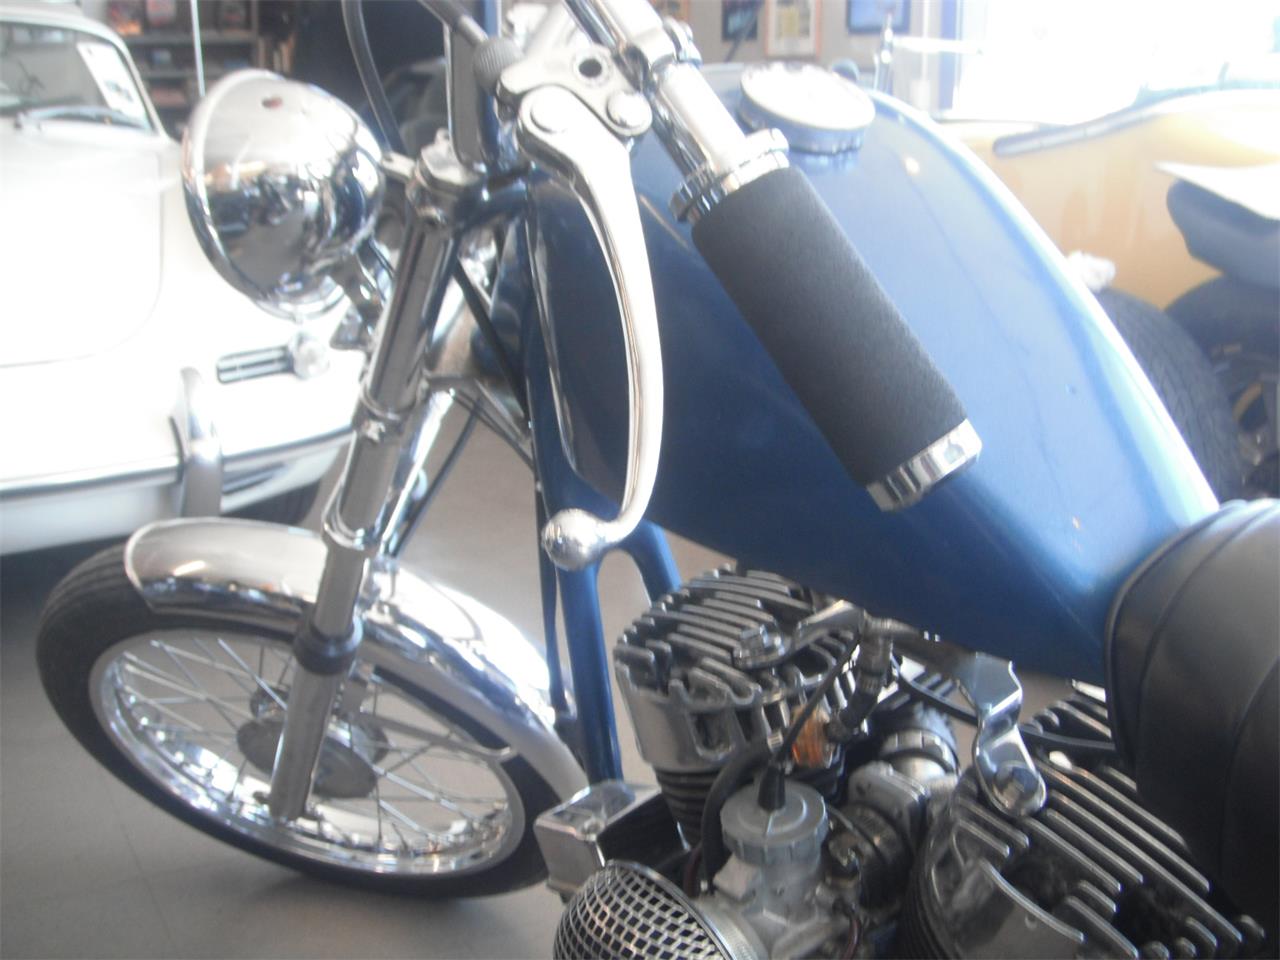 1955 Harley-Davidson Motorcycle for sale in Carnation, WA – photo 38